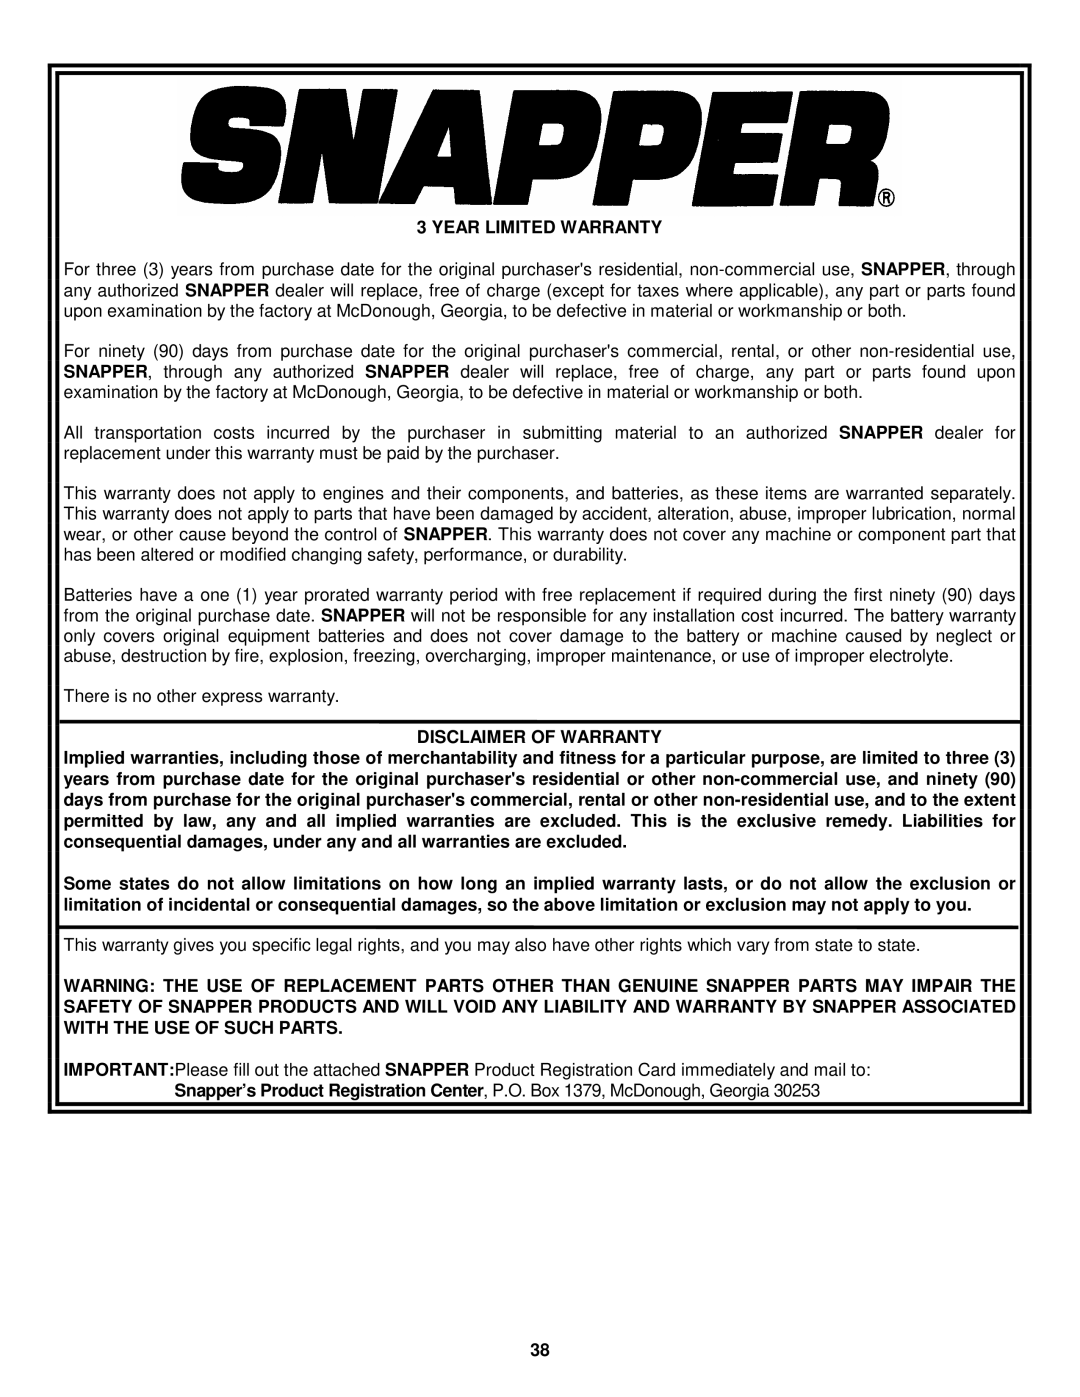 Snapper ELT150H33IBV important safety instructions Year Limited Warranty, Disclaimer of Warranty 